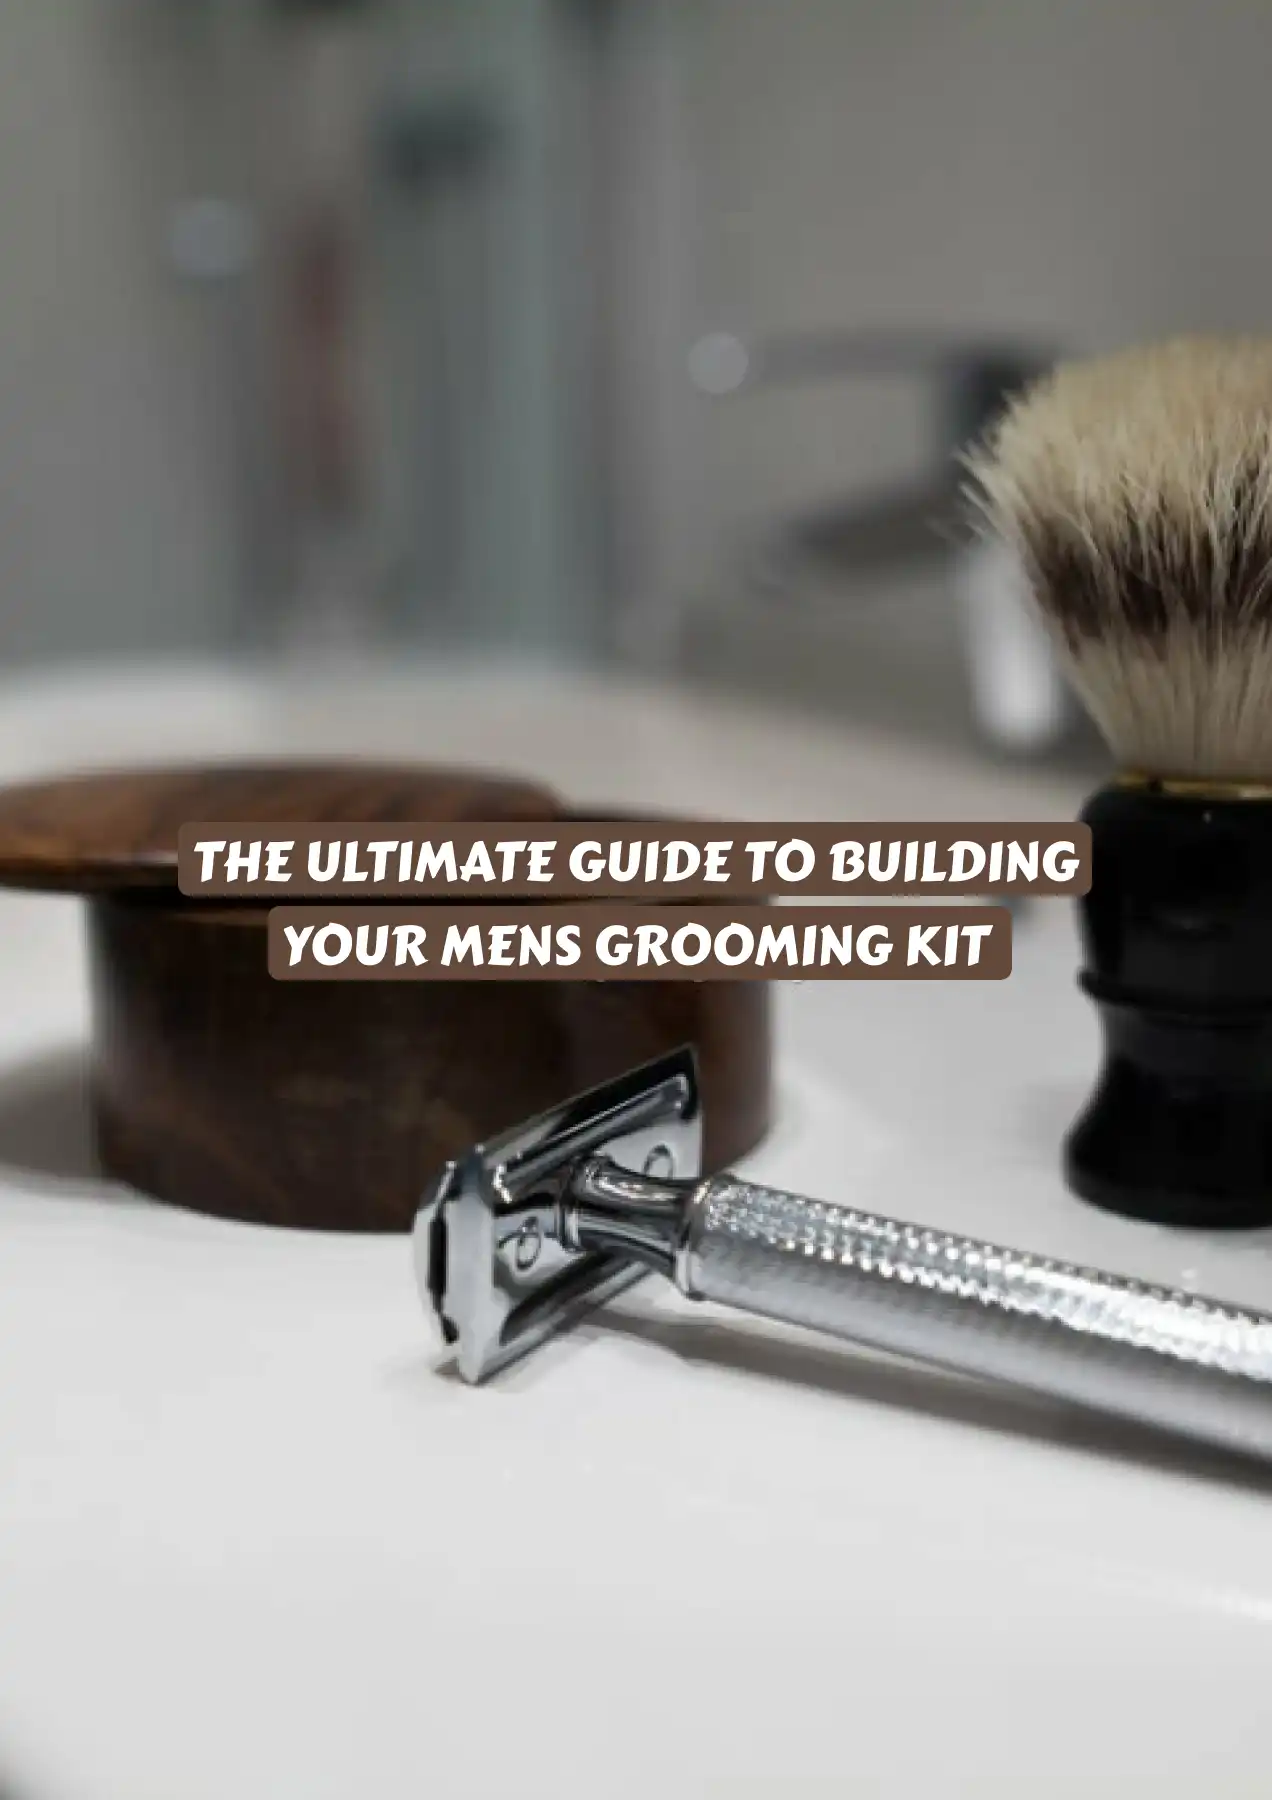 The ultimate guide to building your Men's grooming kit